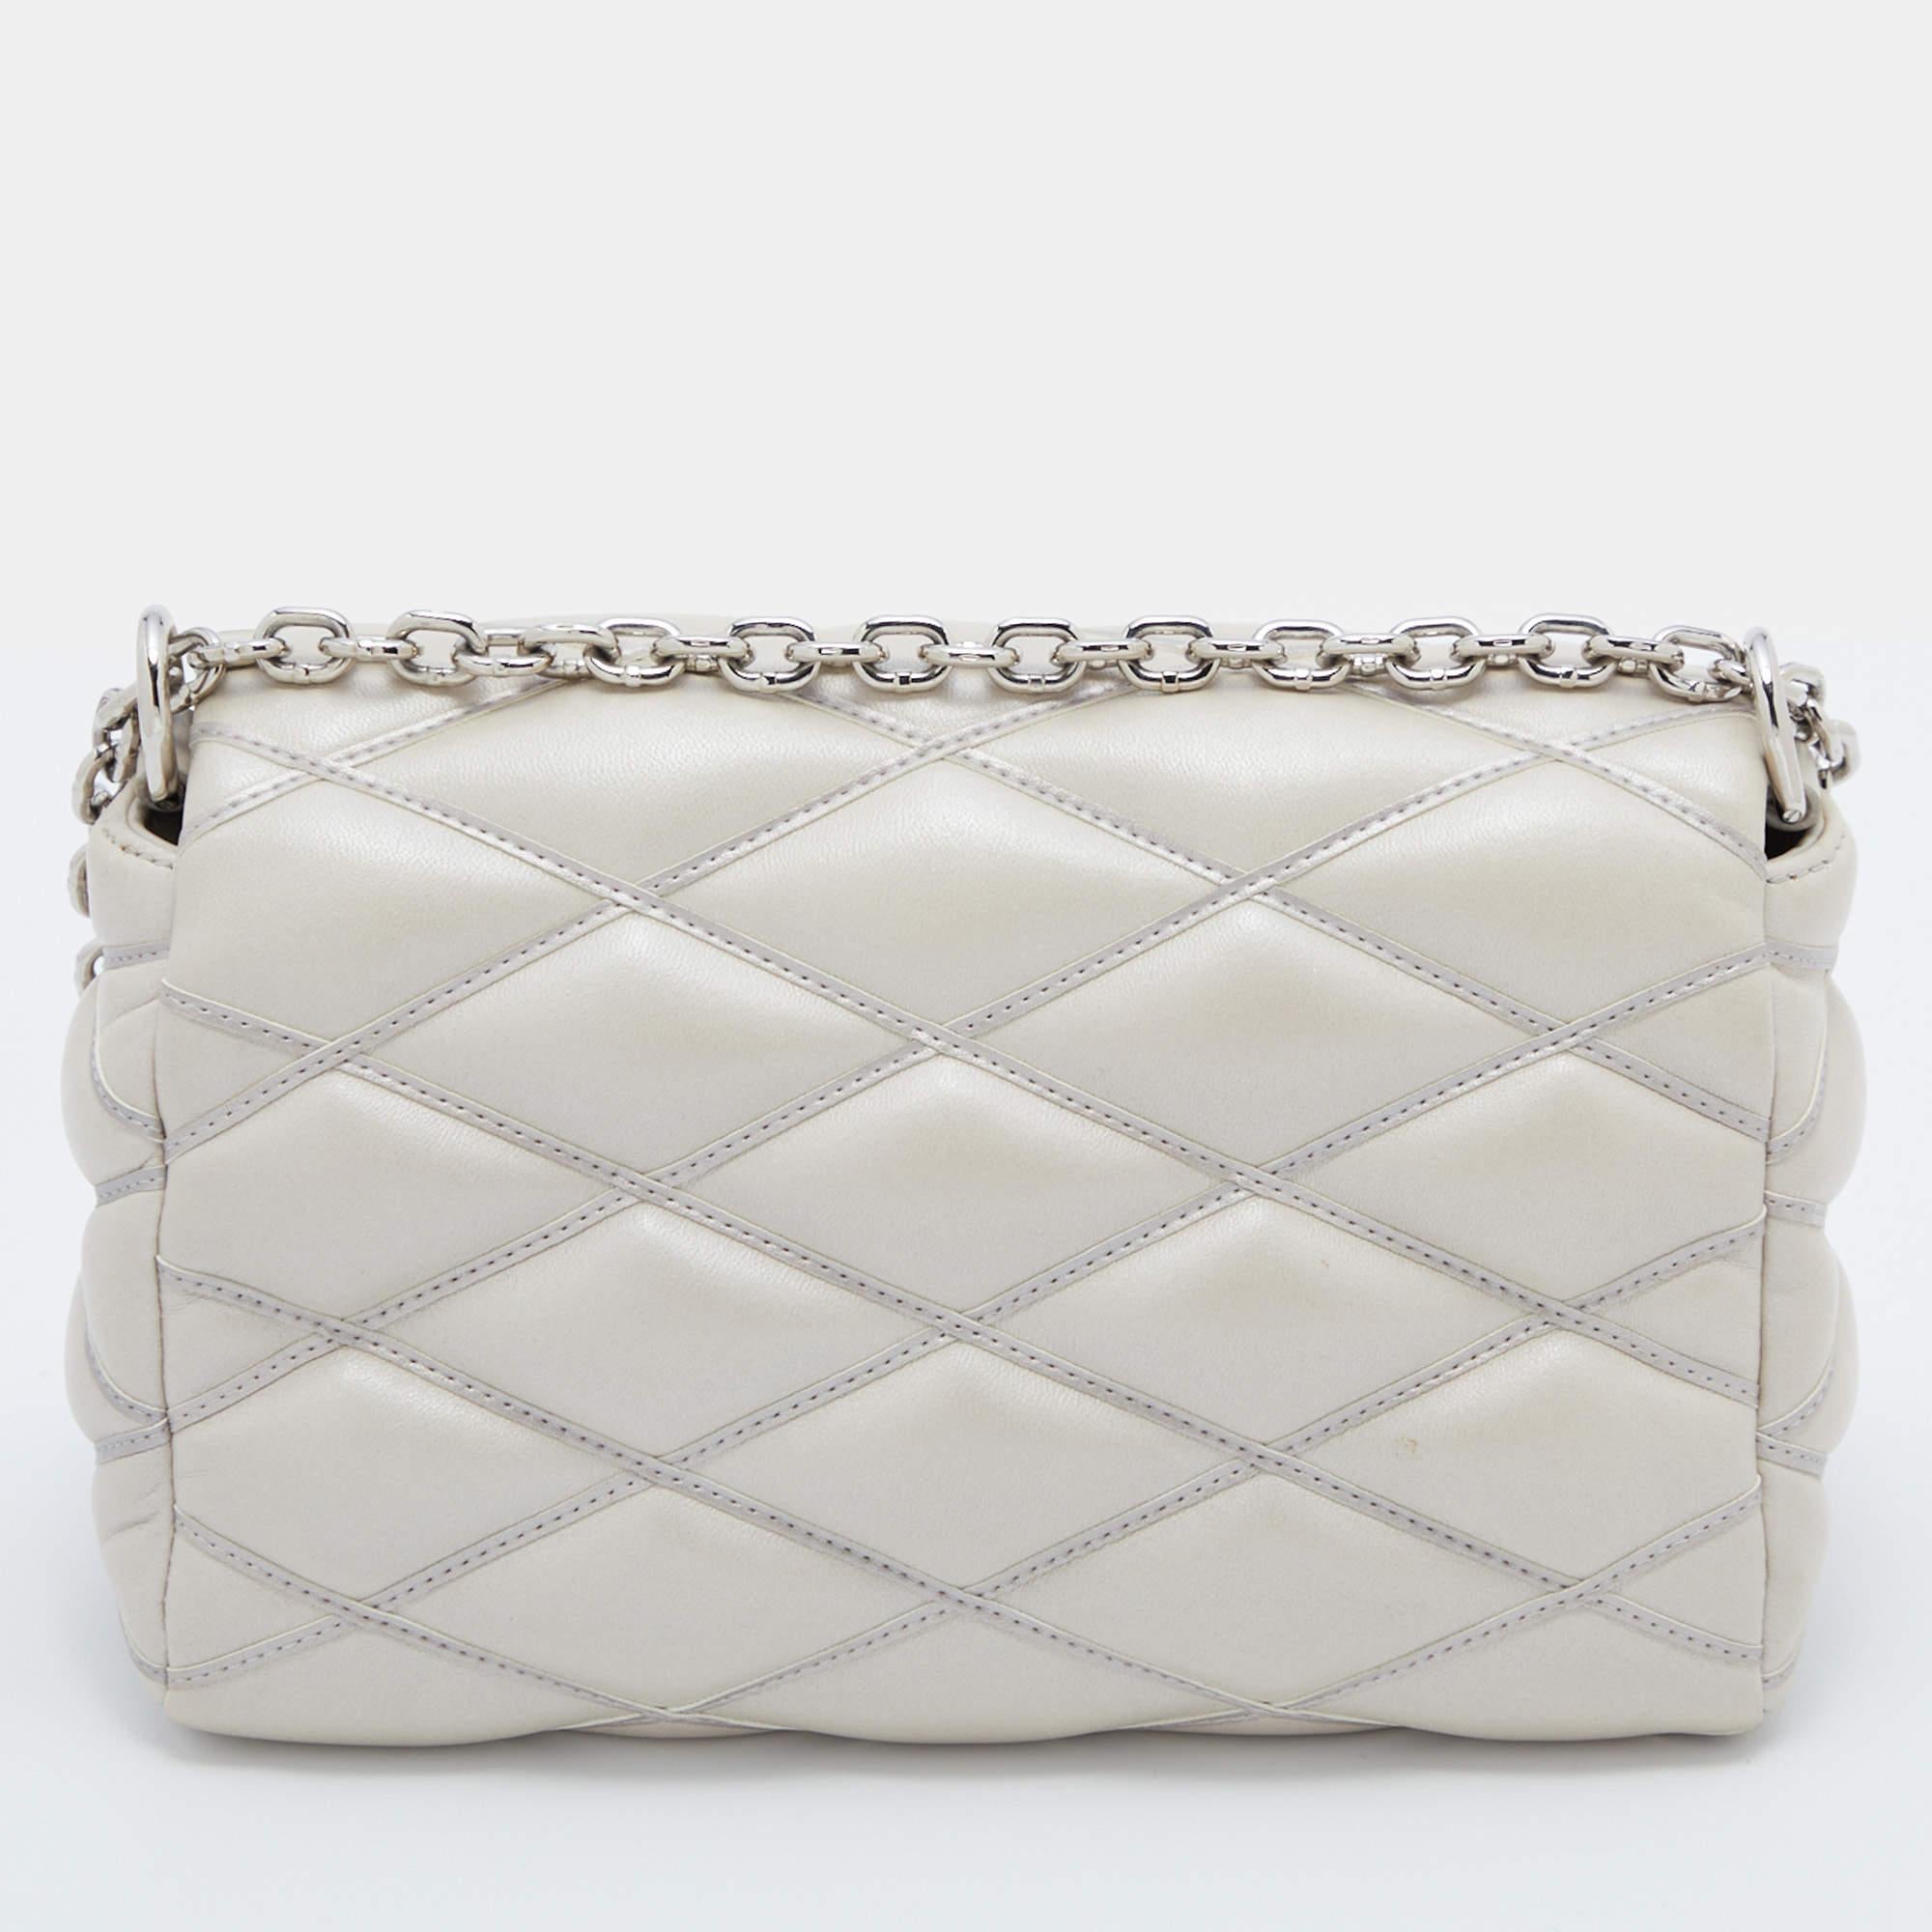 This Louis Vuitton PM bag will be one of your favorite everyday accessories. Expertly made from quilted lambskin leather, it features a chain-leather shoulder strap, silver-tone hardware, and a leather-lined interior. The brand-detailed flap closure